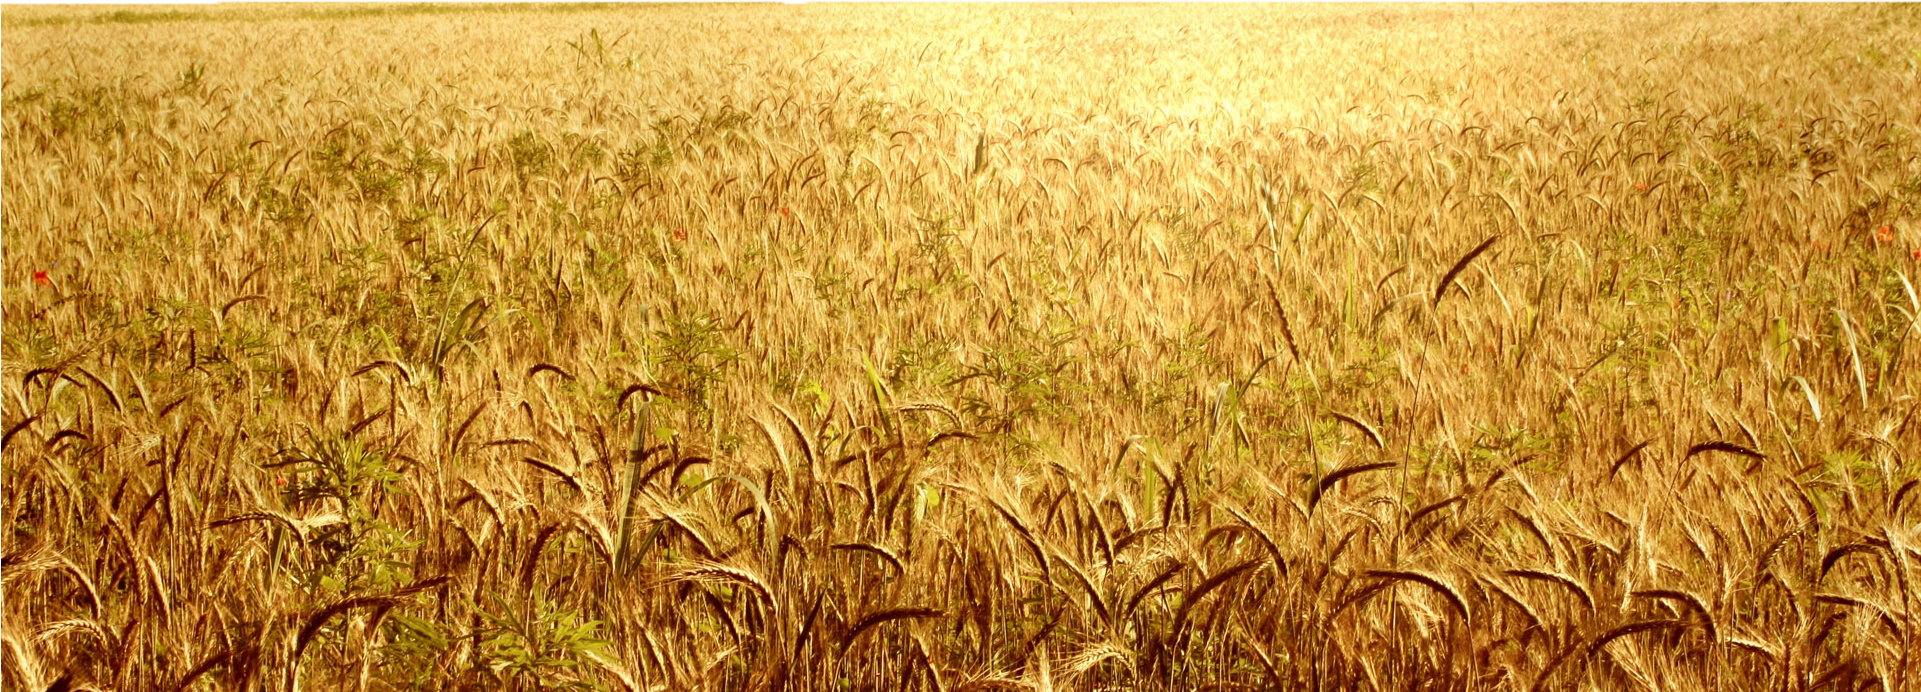 Wheat Field PNG Free Download